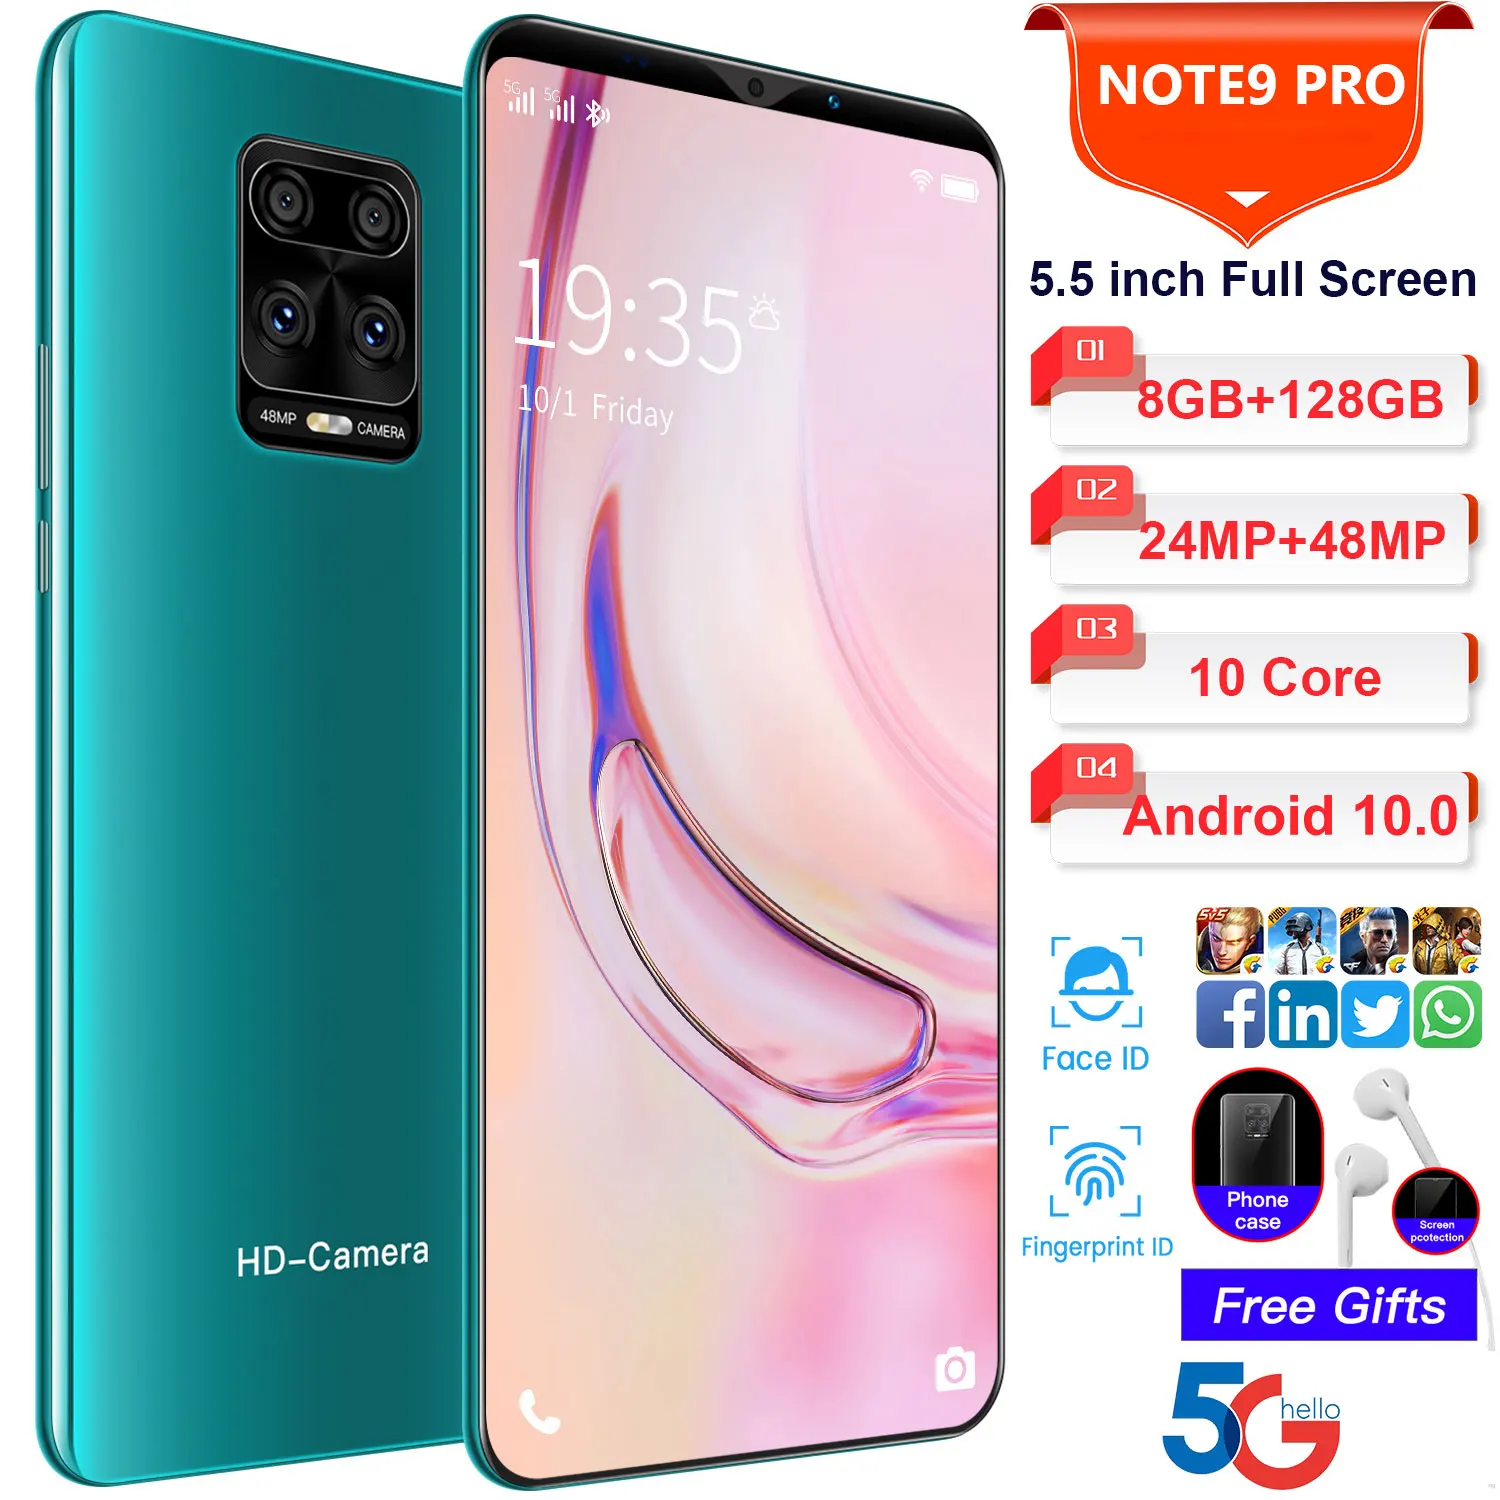 

Global Version Note 9 Pro-5.5 Inch Full Screen Smartphone 8+128GB 10 Core Android10 Cellphone 48MP Face Unlock 5G Network Phone